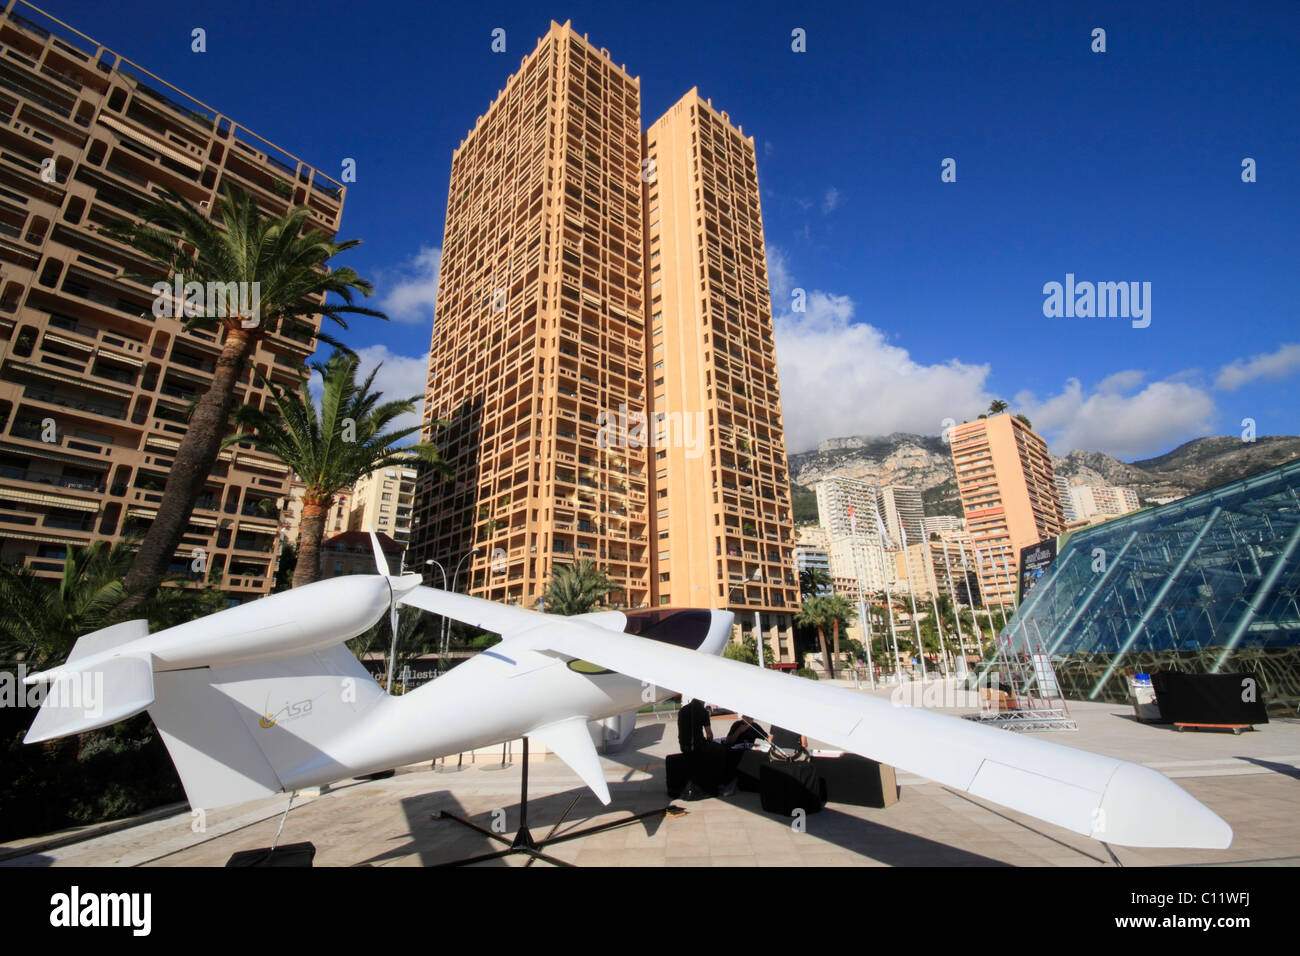 Small aircraft of the brand Visa Airplanes in front of the Grimaldi Forum, skyscrapers Columbia Palace and Houston Palace Stock Photo